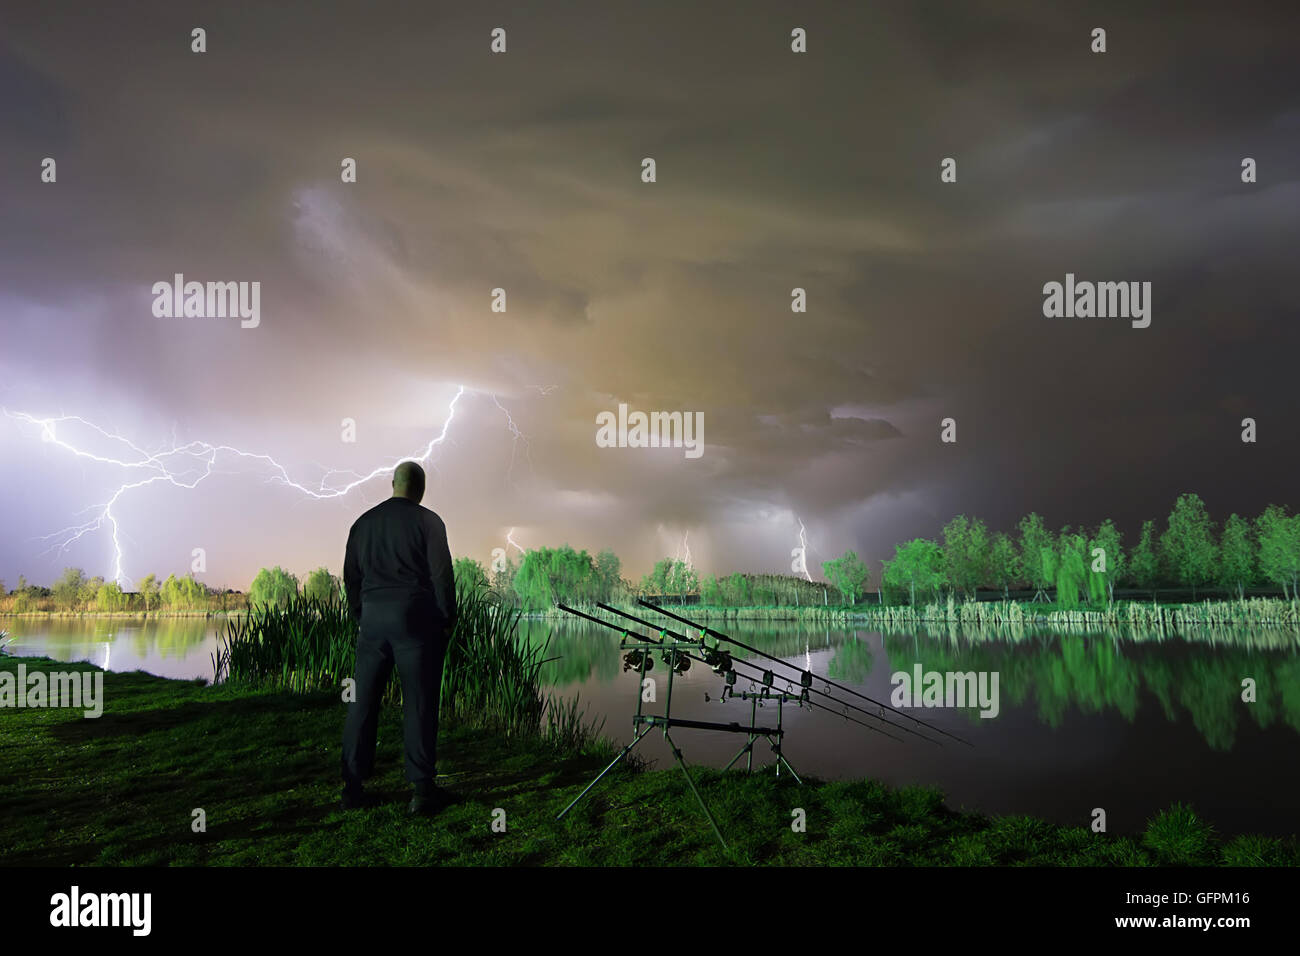 The storm is coming. Man standing in a storm. Man with cloud over his head. Night Fishing in a storm Stock Photo